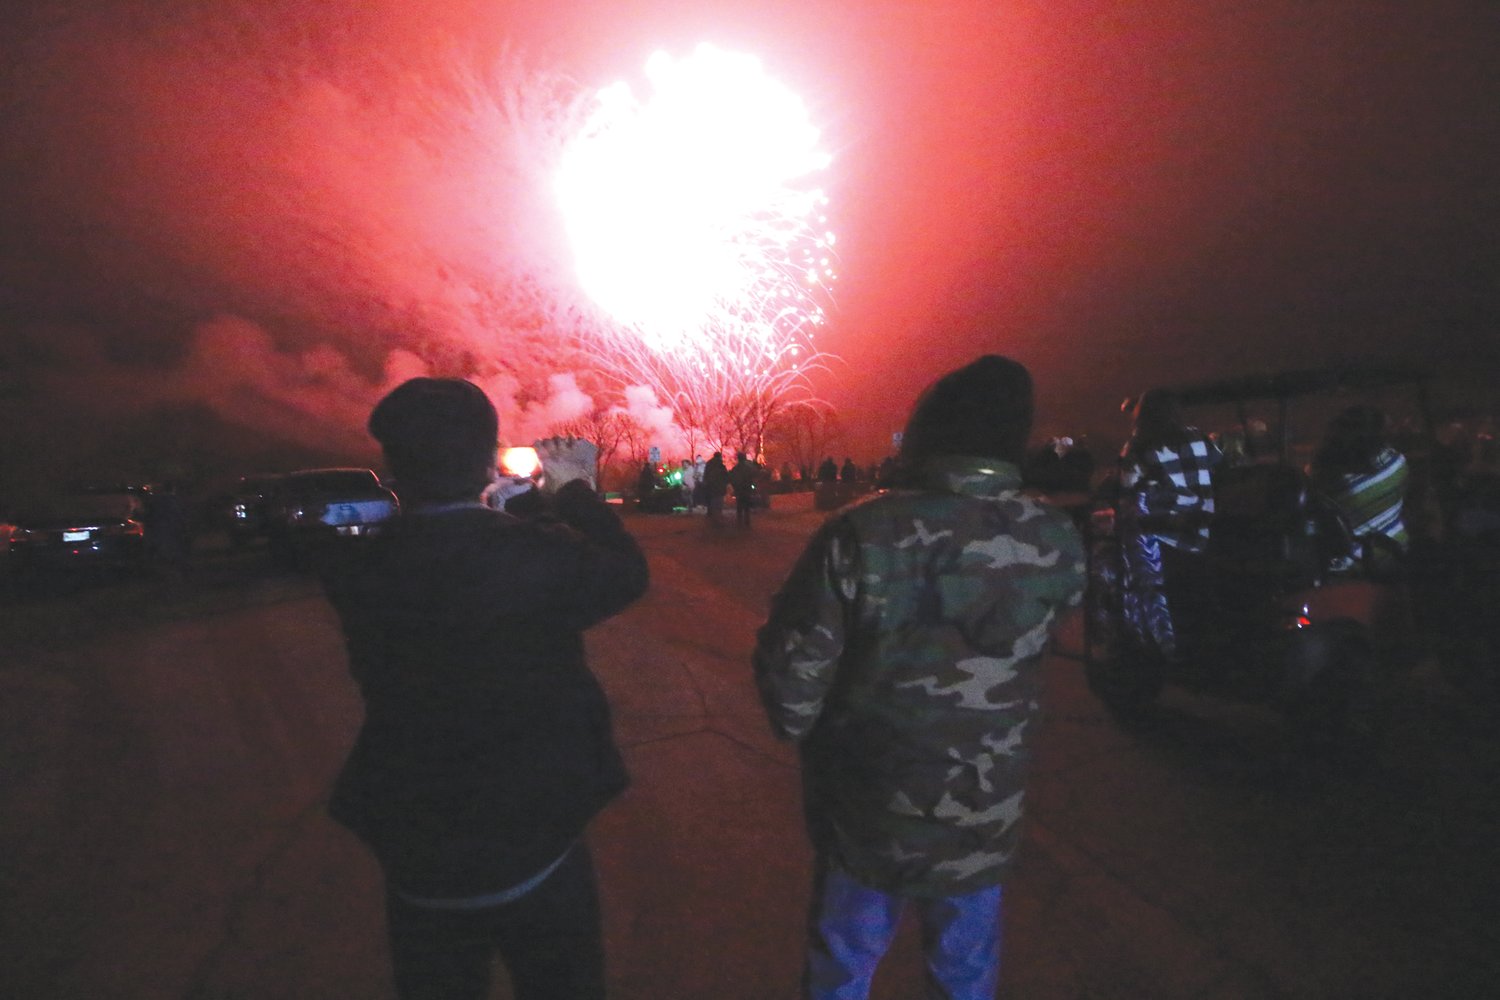 WHAT EVERBODY WAS WAITING FOR: Misty conditions gave a surreal glow to the fireworks display.